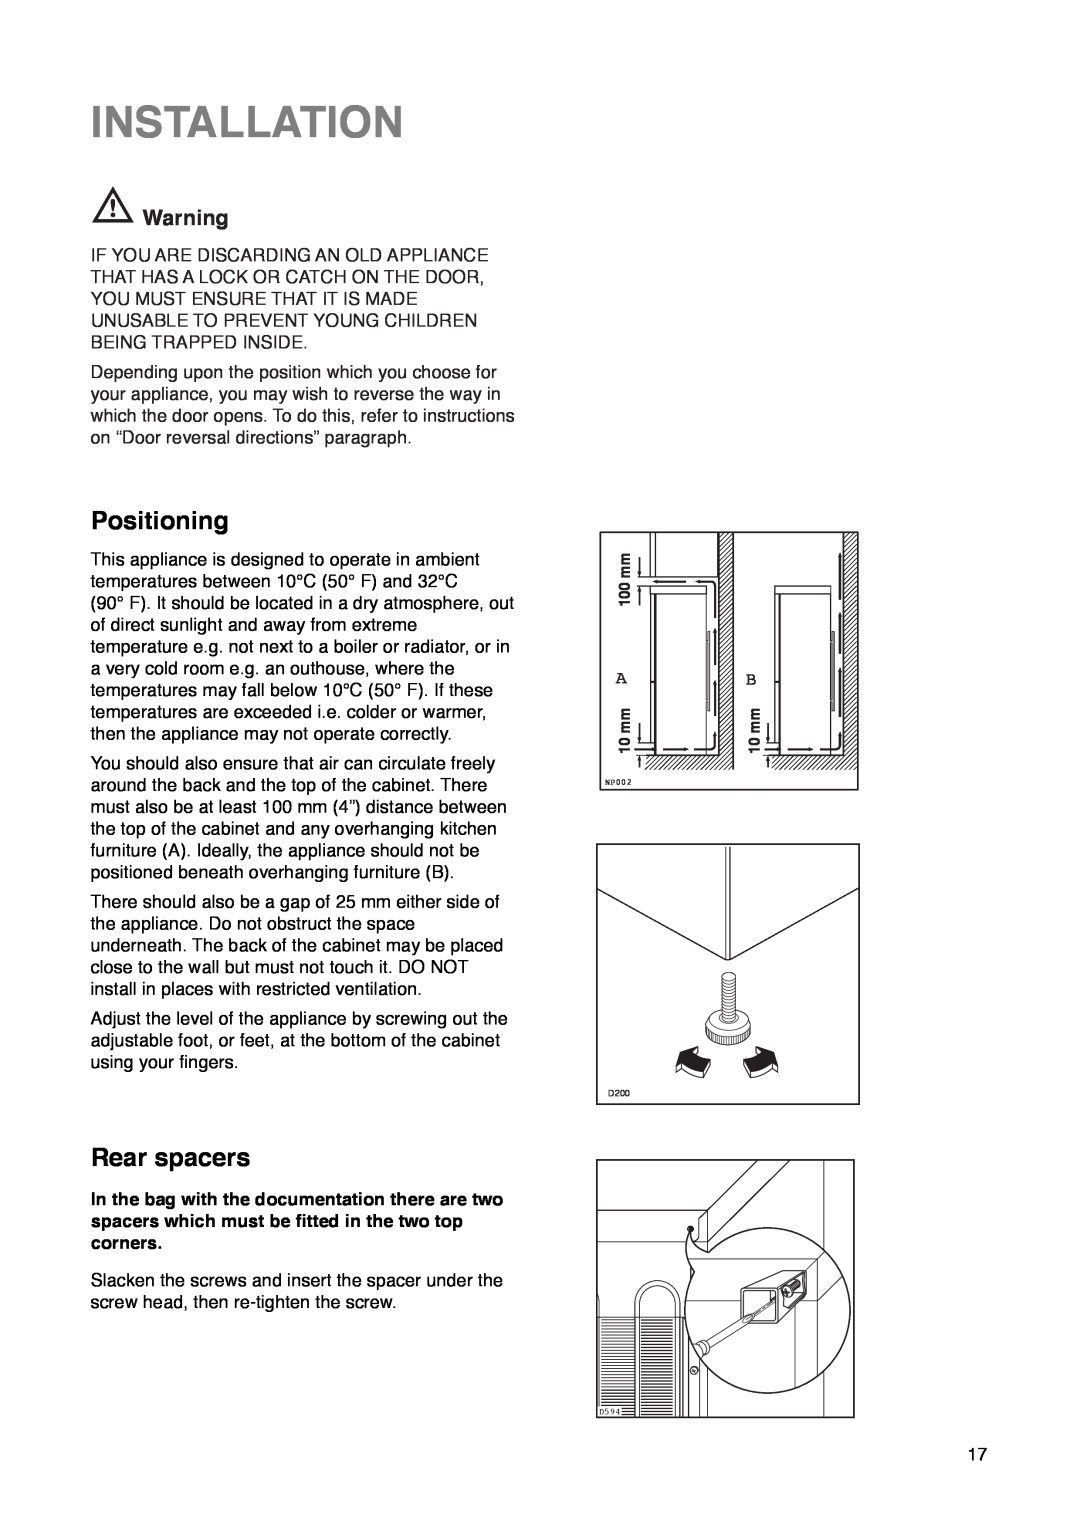 Tricity Bendix FD 852 installation instructions Installation, Positioning, Rear spacers 